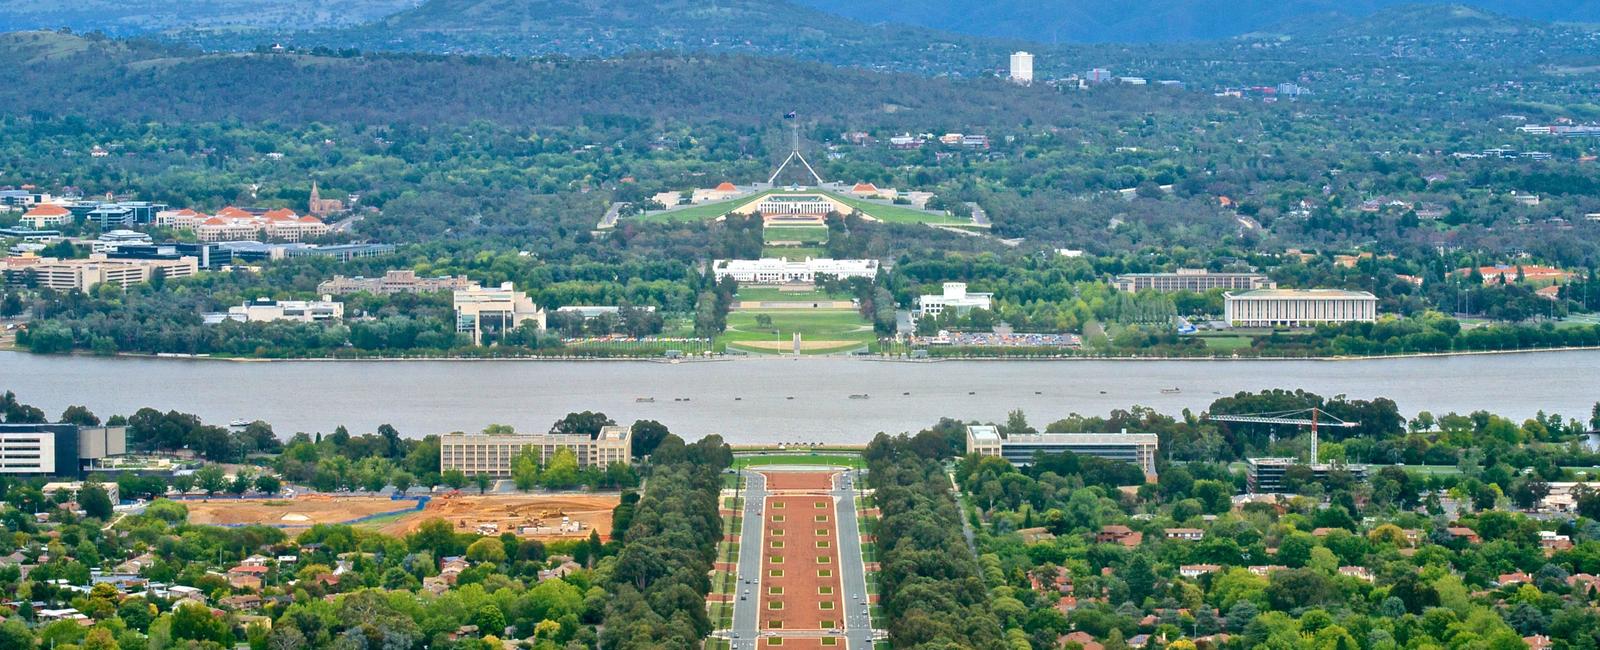 Canberra is the capital city of which country australia